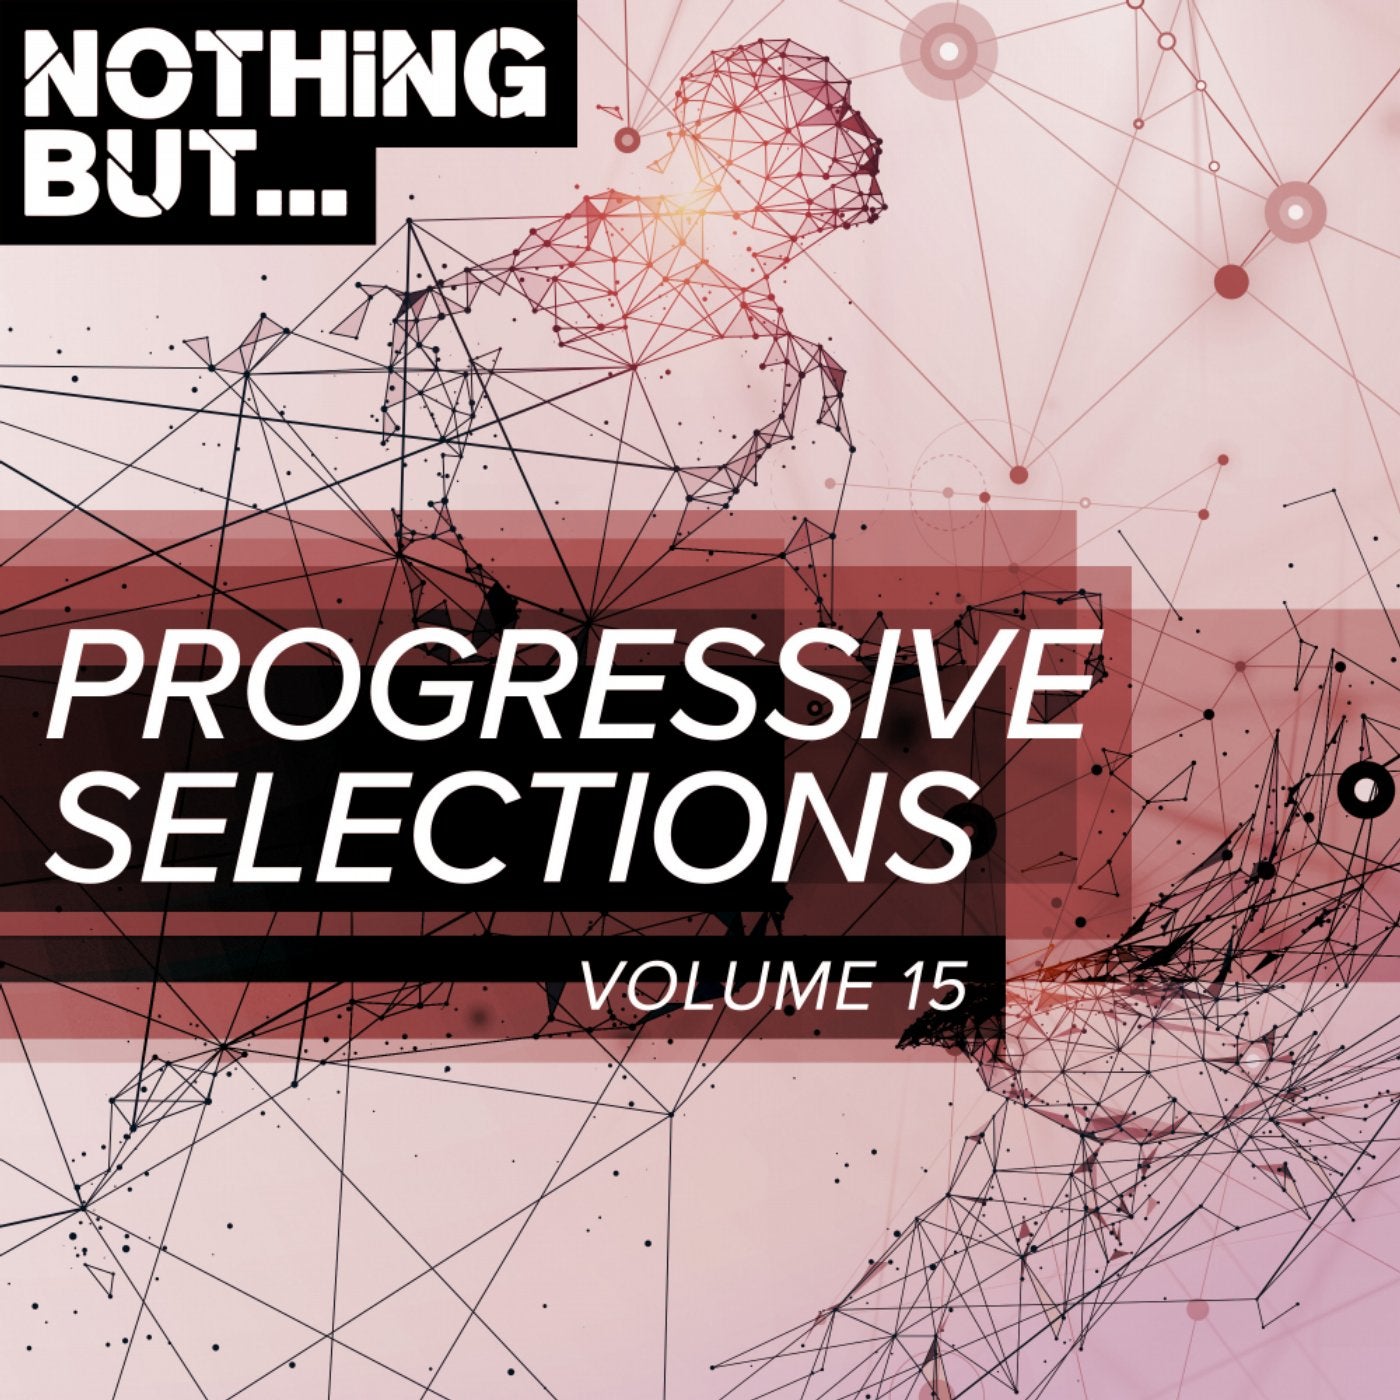 Nothing But... Progressive Selections, Vol. 15